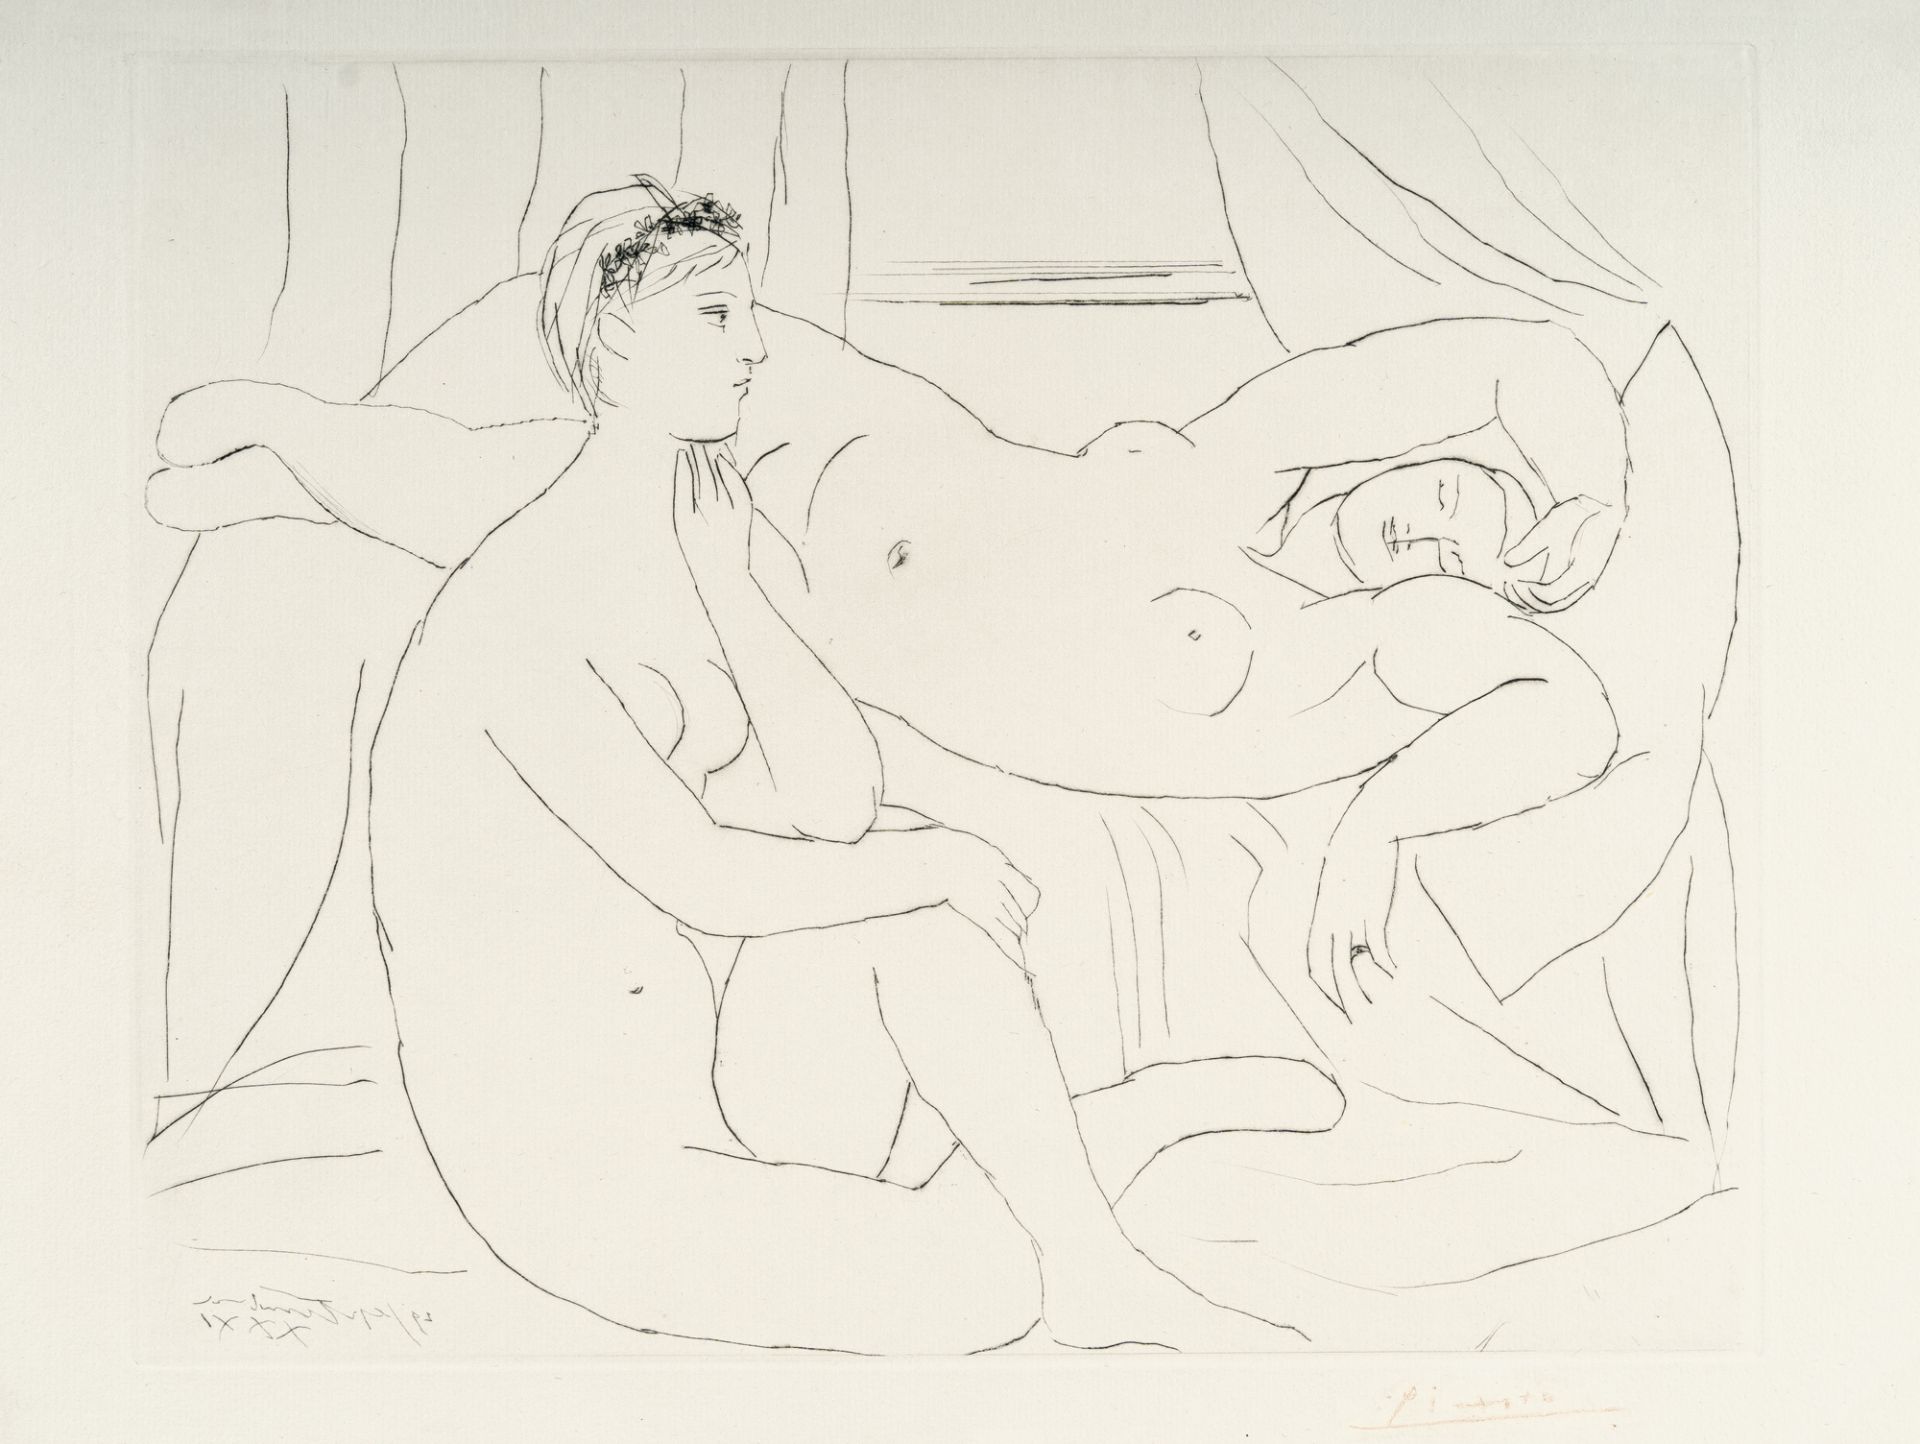 Pablo Picasso, Deux femmes se reposant.Etching with drypoint on machine made laid paper